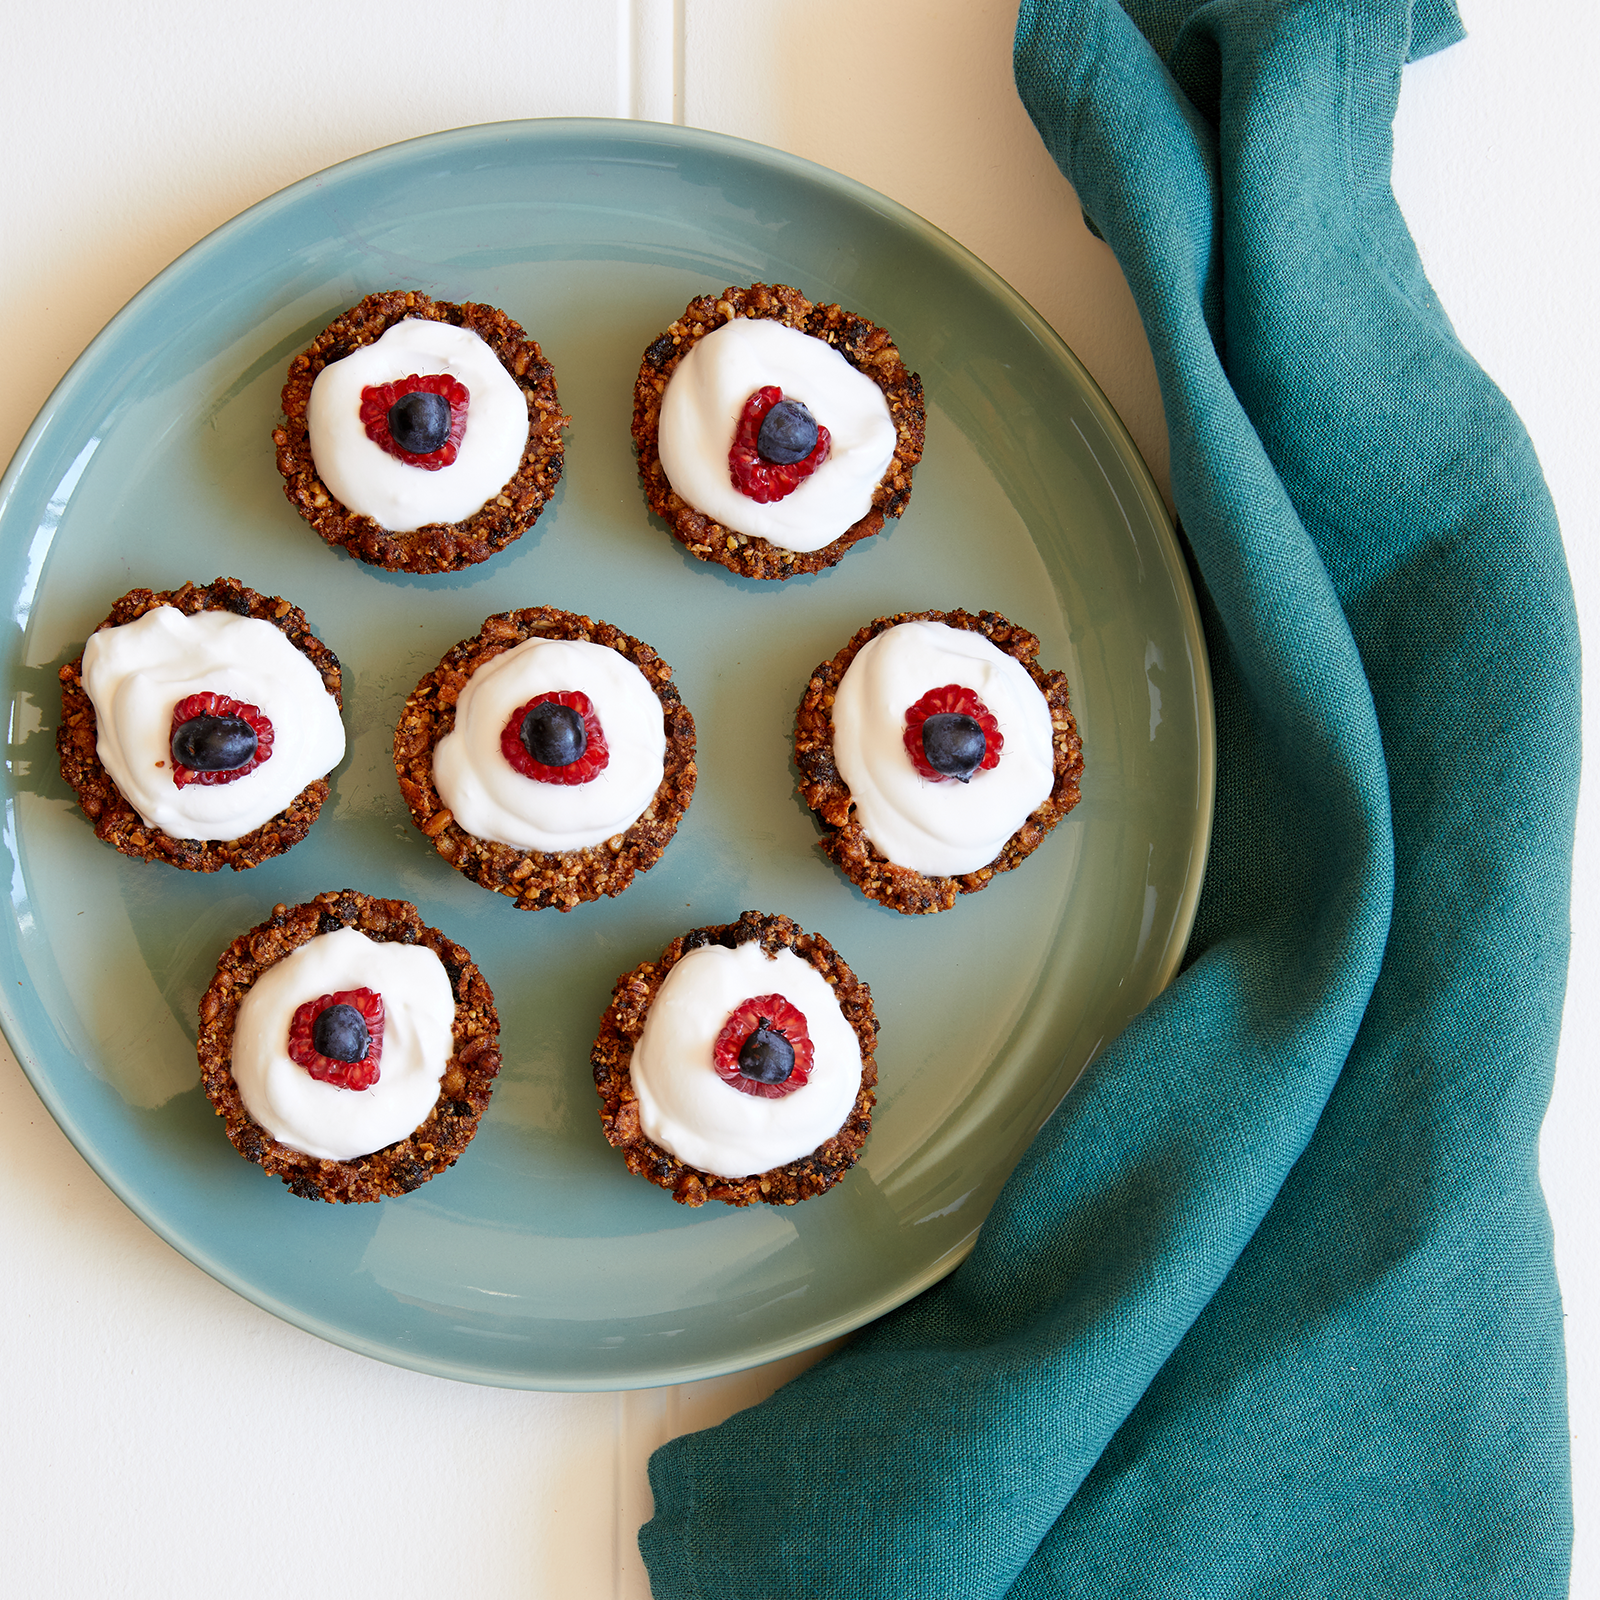 Overhead shot of individual gluten-free granola tarts filled with vegan yoghurt and topped with berries. The tarts are sitting on a large green plate on a white background.